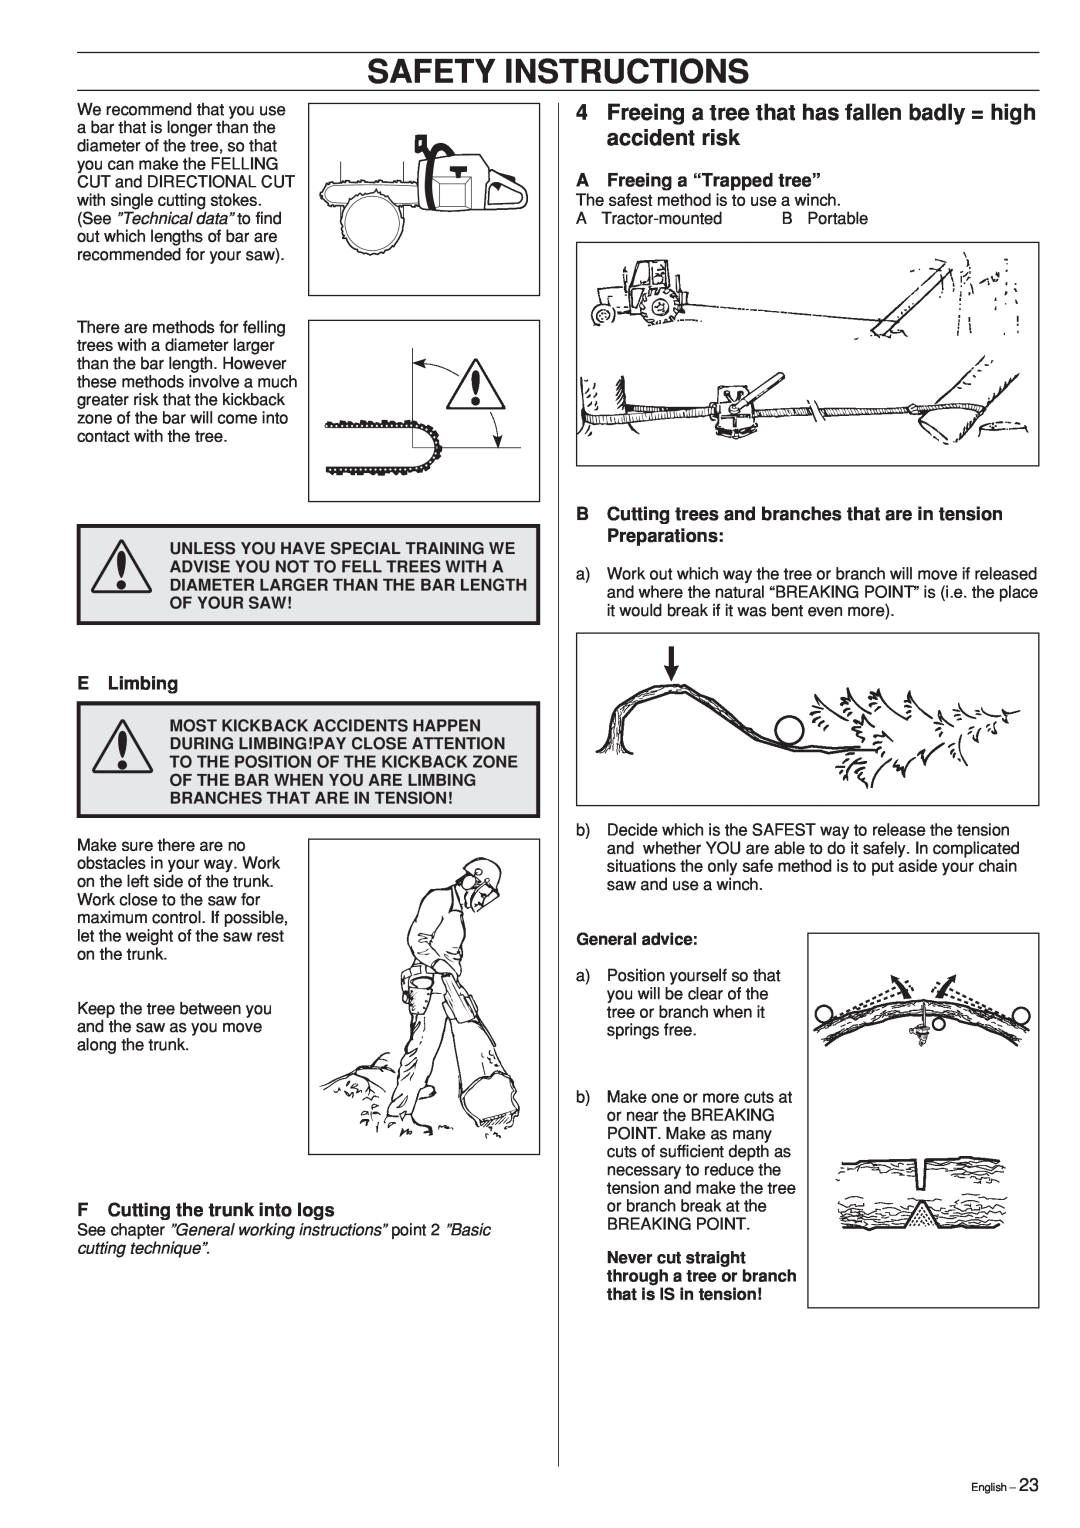 Husqvarna 55 Safety Instructions, Freeing a tree that has fallen badly = high accident risk, E Limbing, General advice 